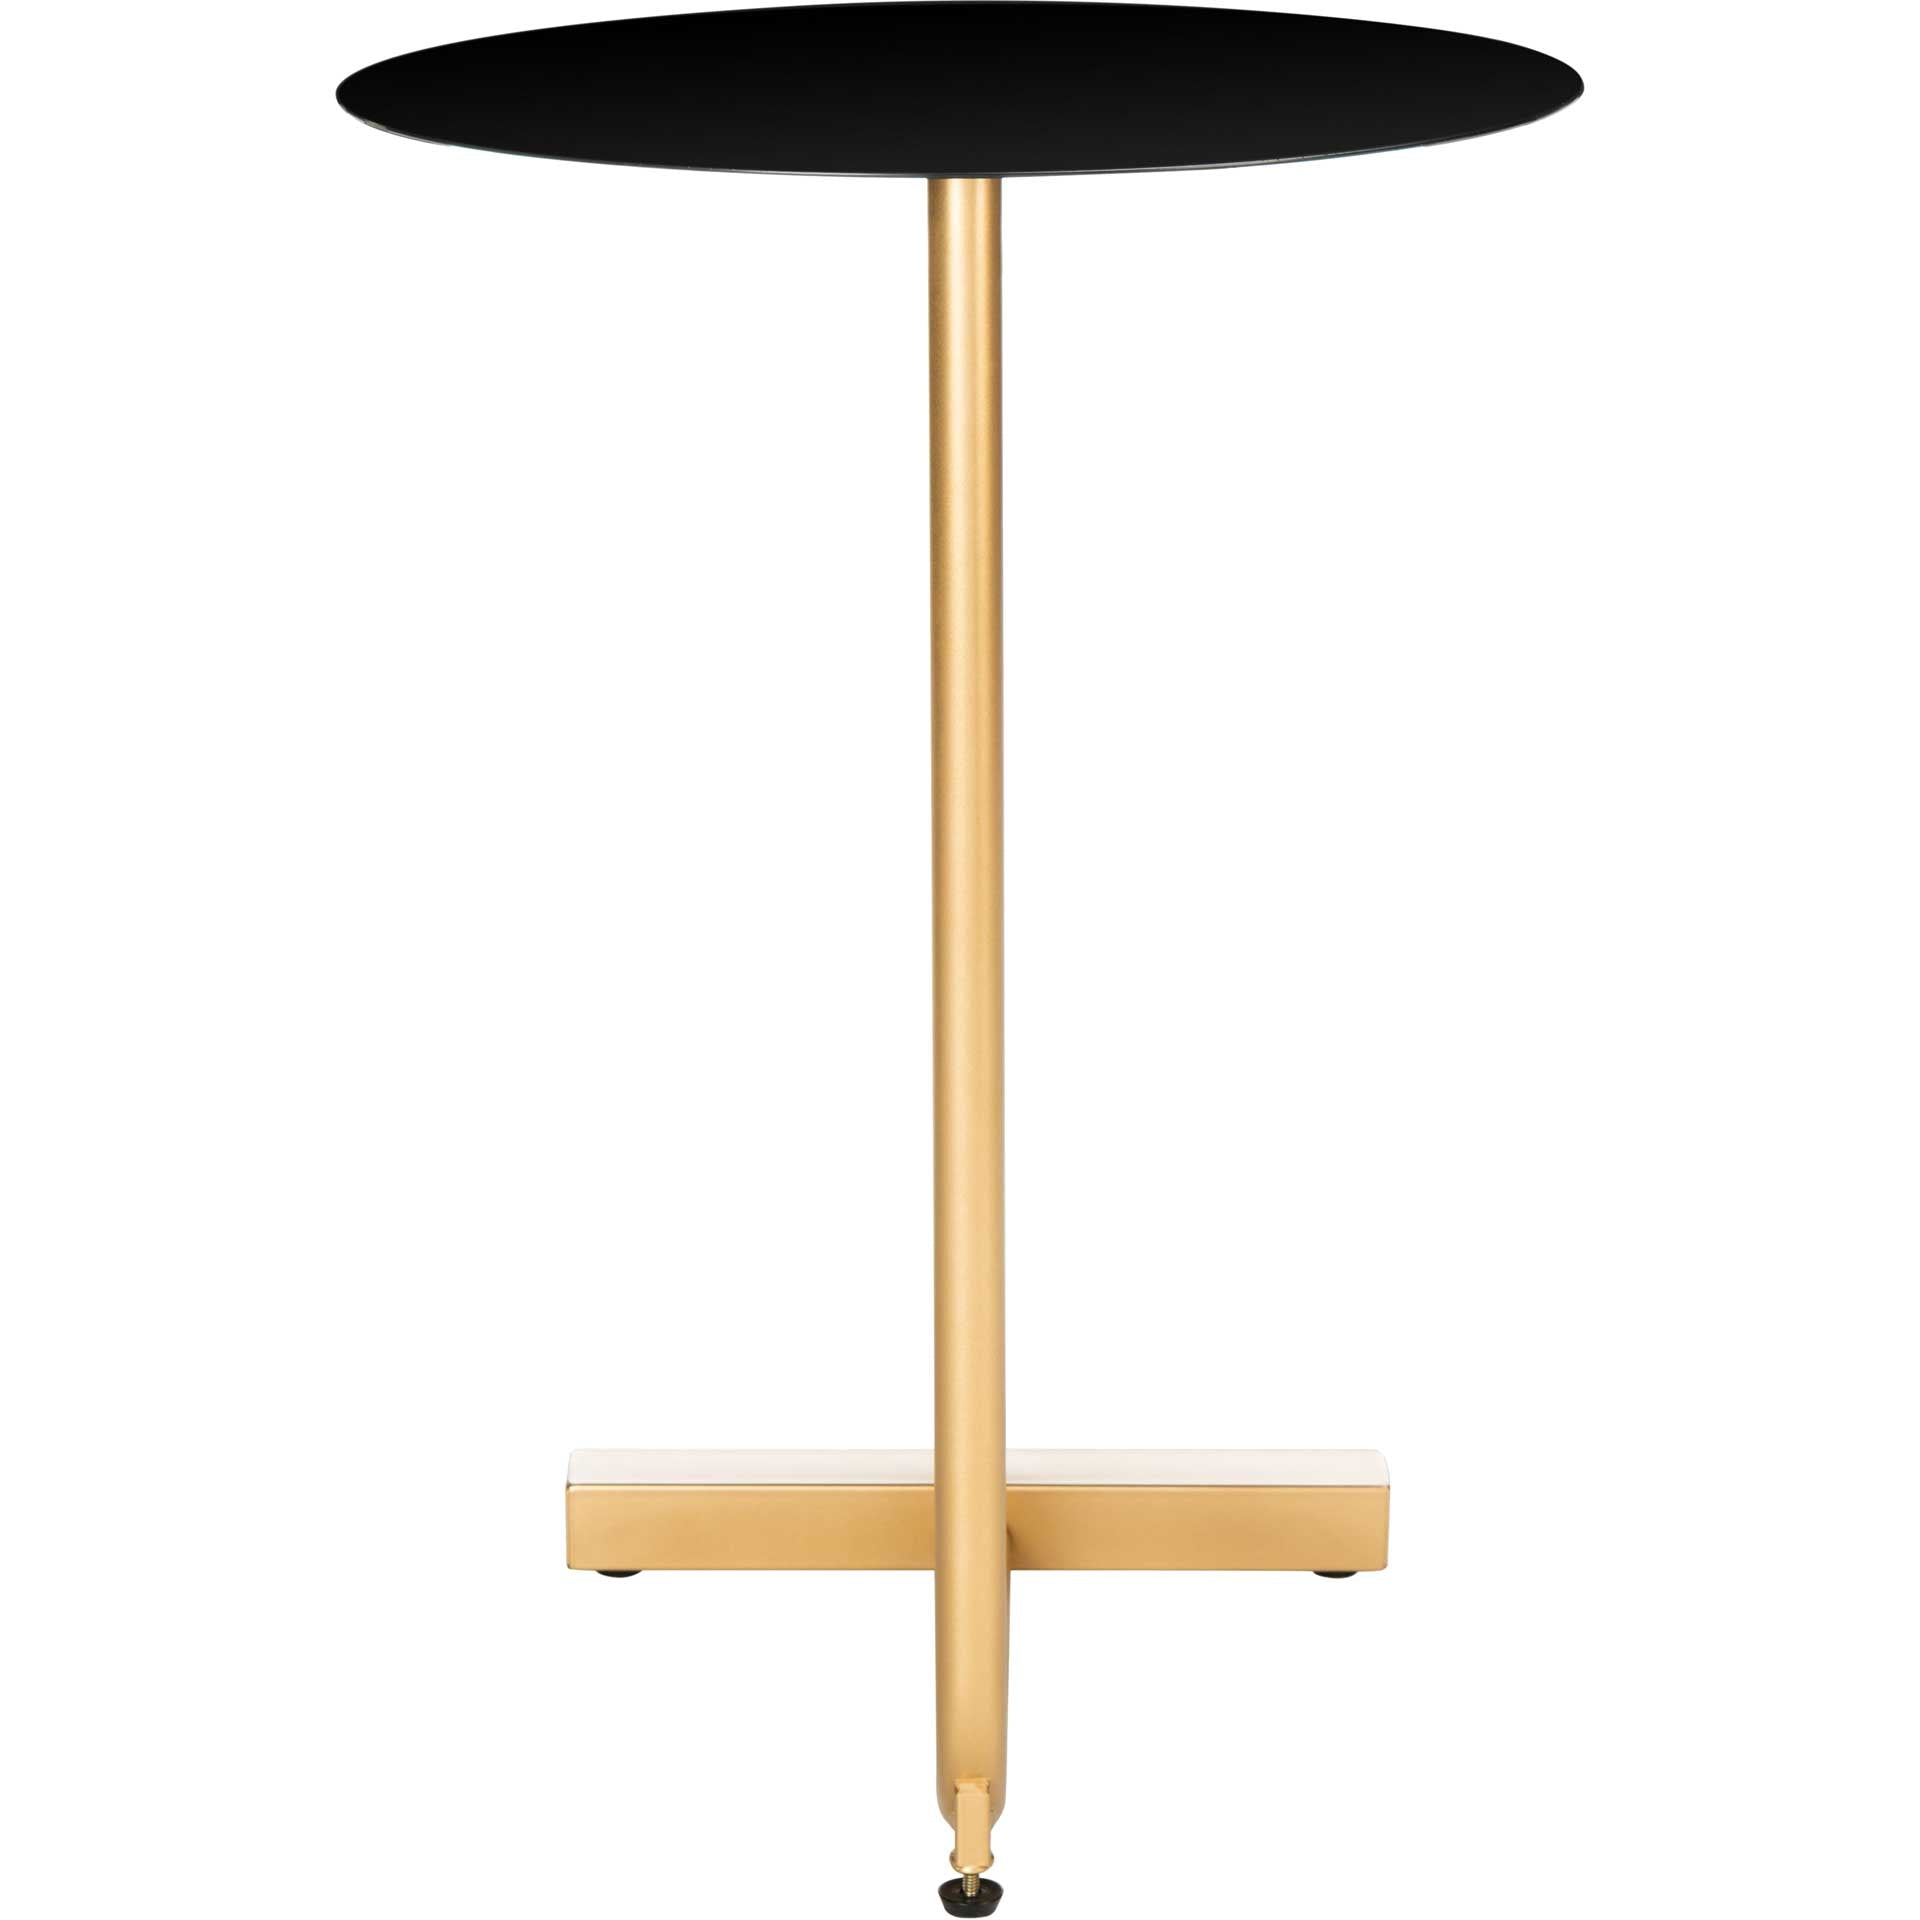 Harlyn Round Side Table Black/Gold